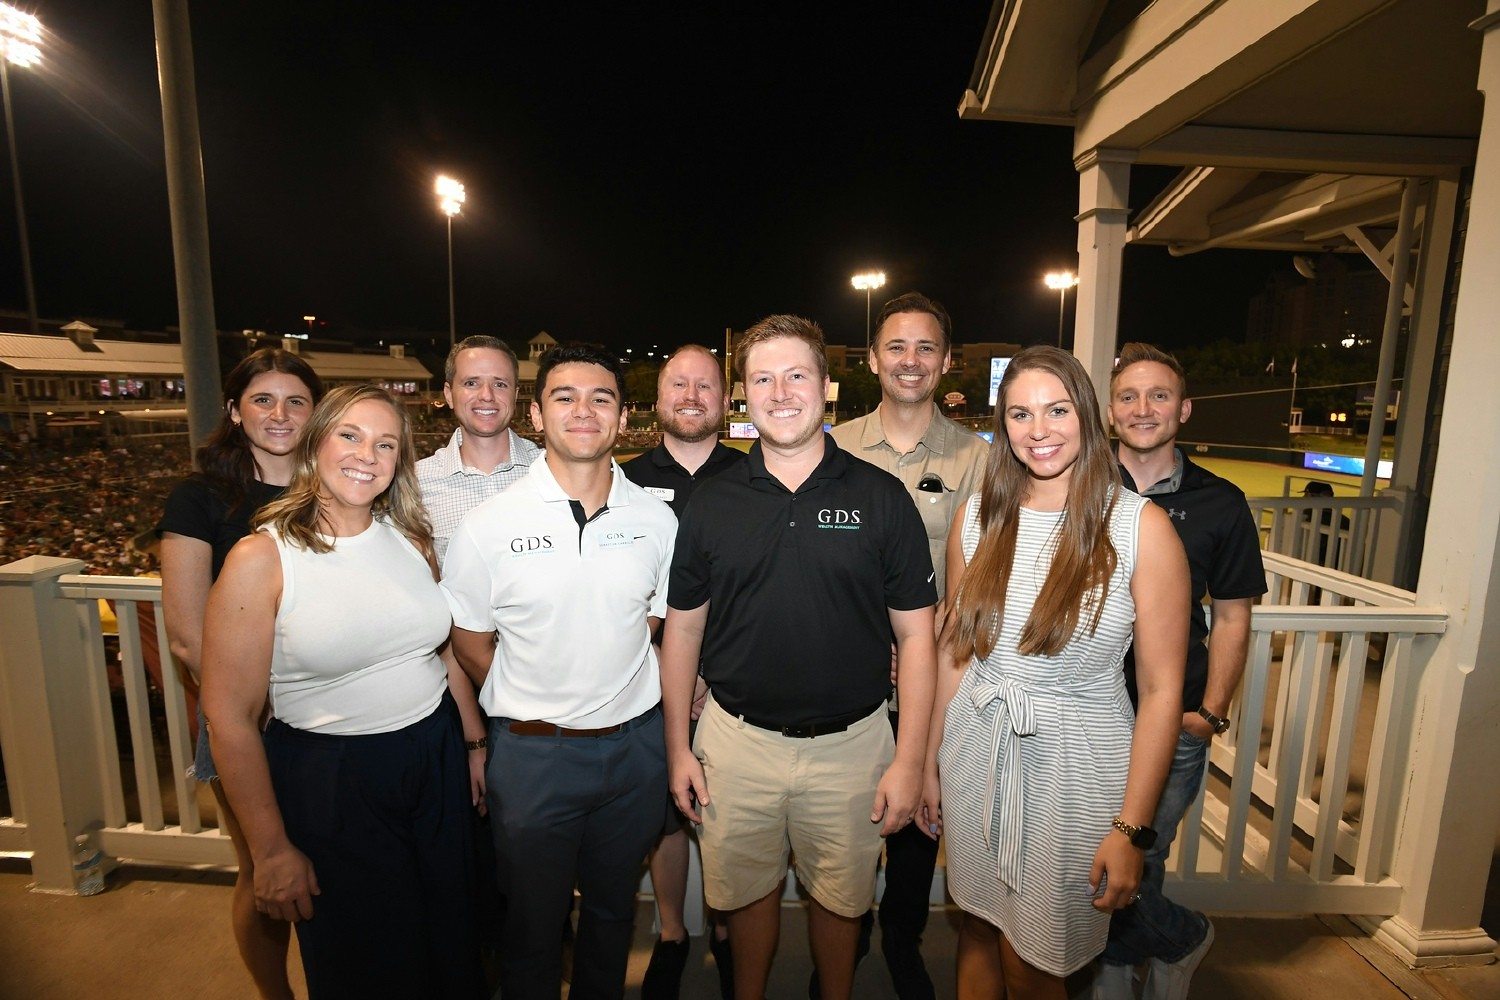 Staff at a Frisco RoughRiders Event